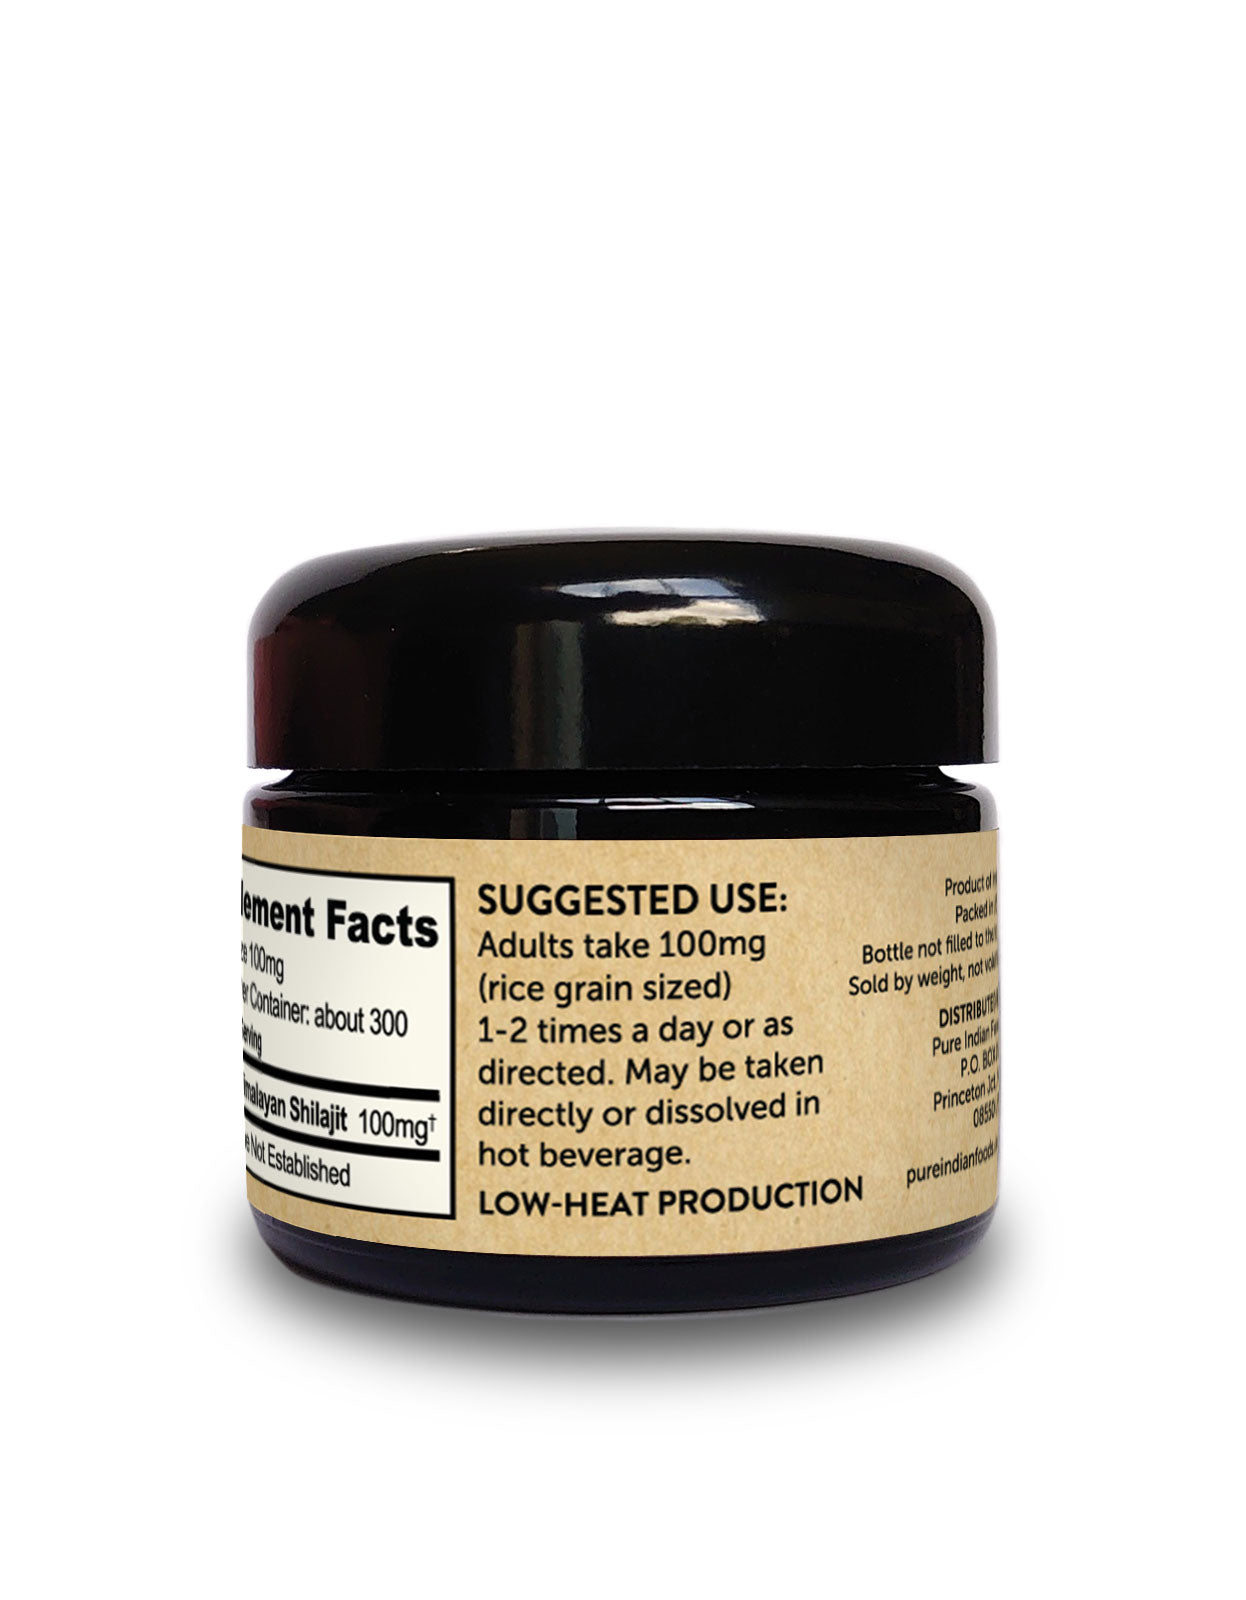 Suggested Use label on jar of Best Ever Shilajit, a pure himalayan shilajit resin. Suggests adults take 100mg 1-2 times a day or as directed. Low-heat production.